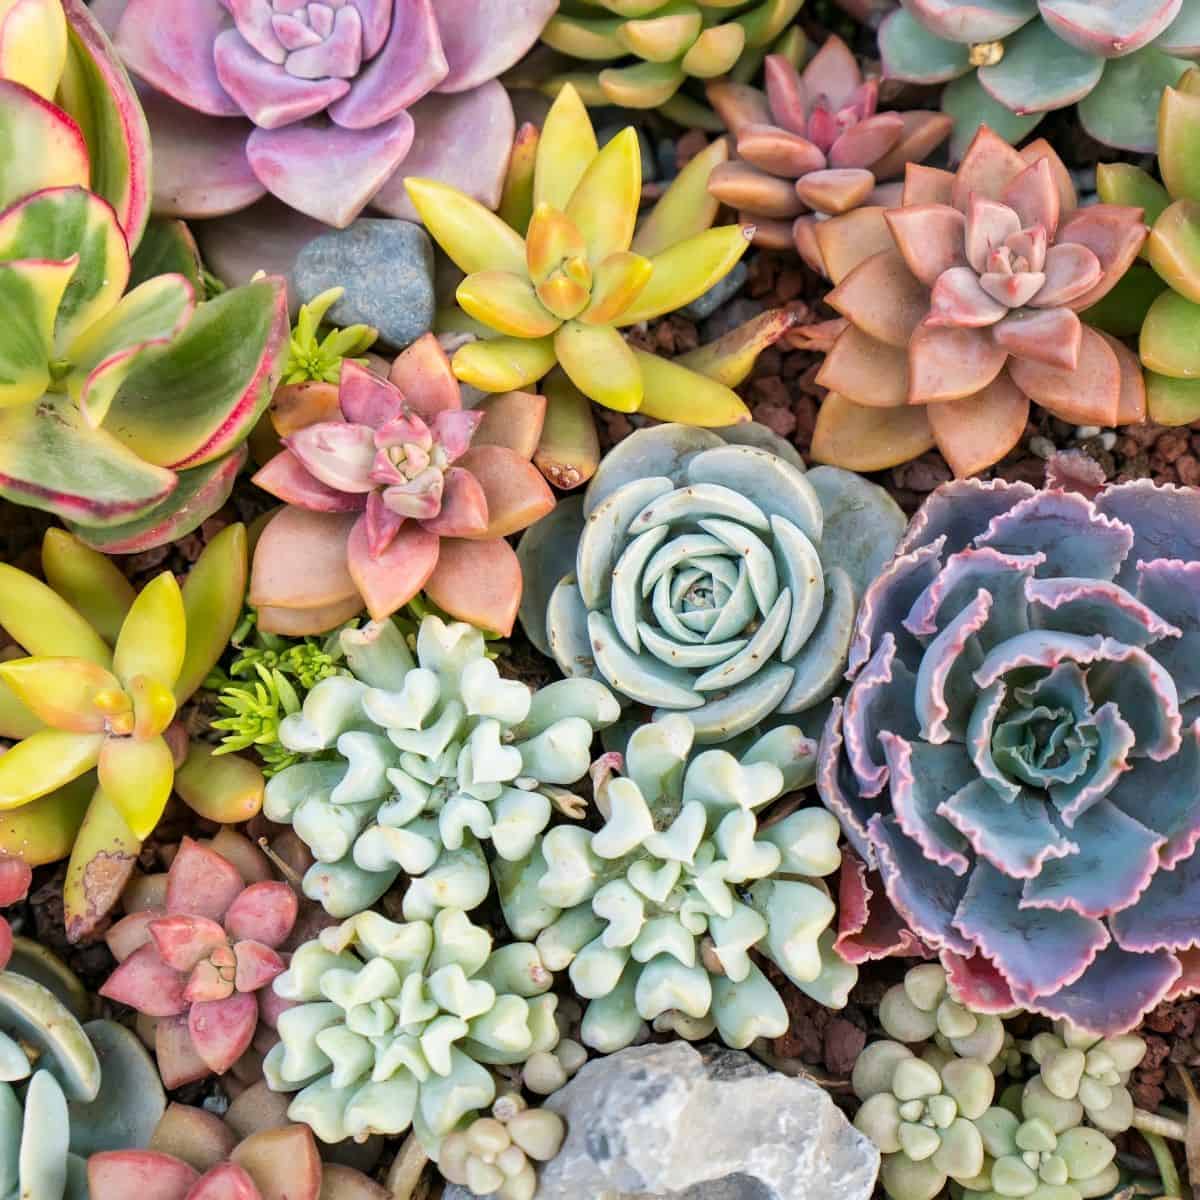 Different varieties of colorful succulents.